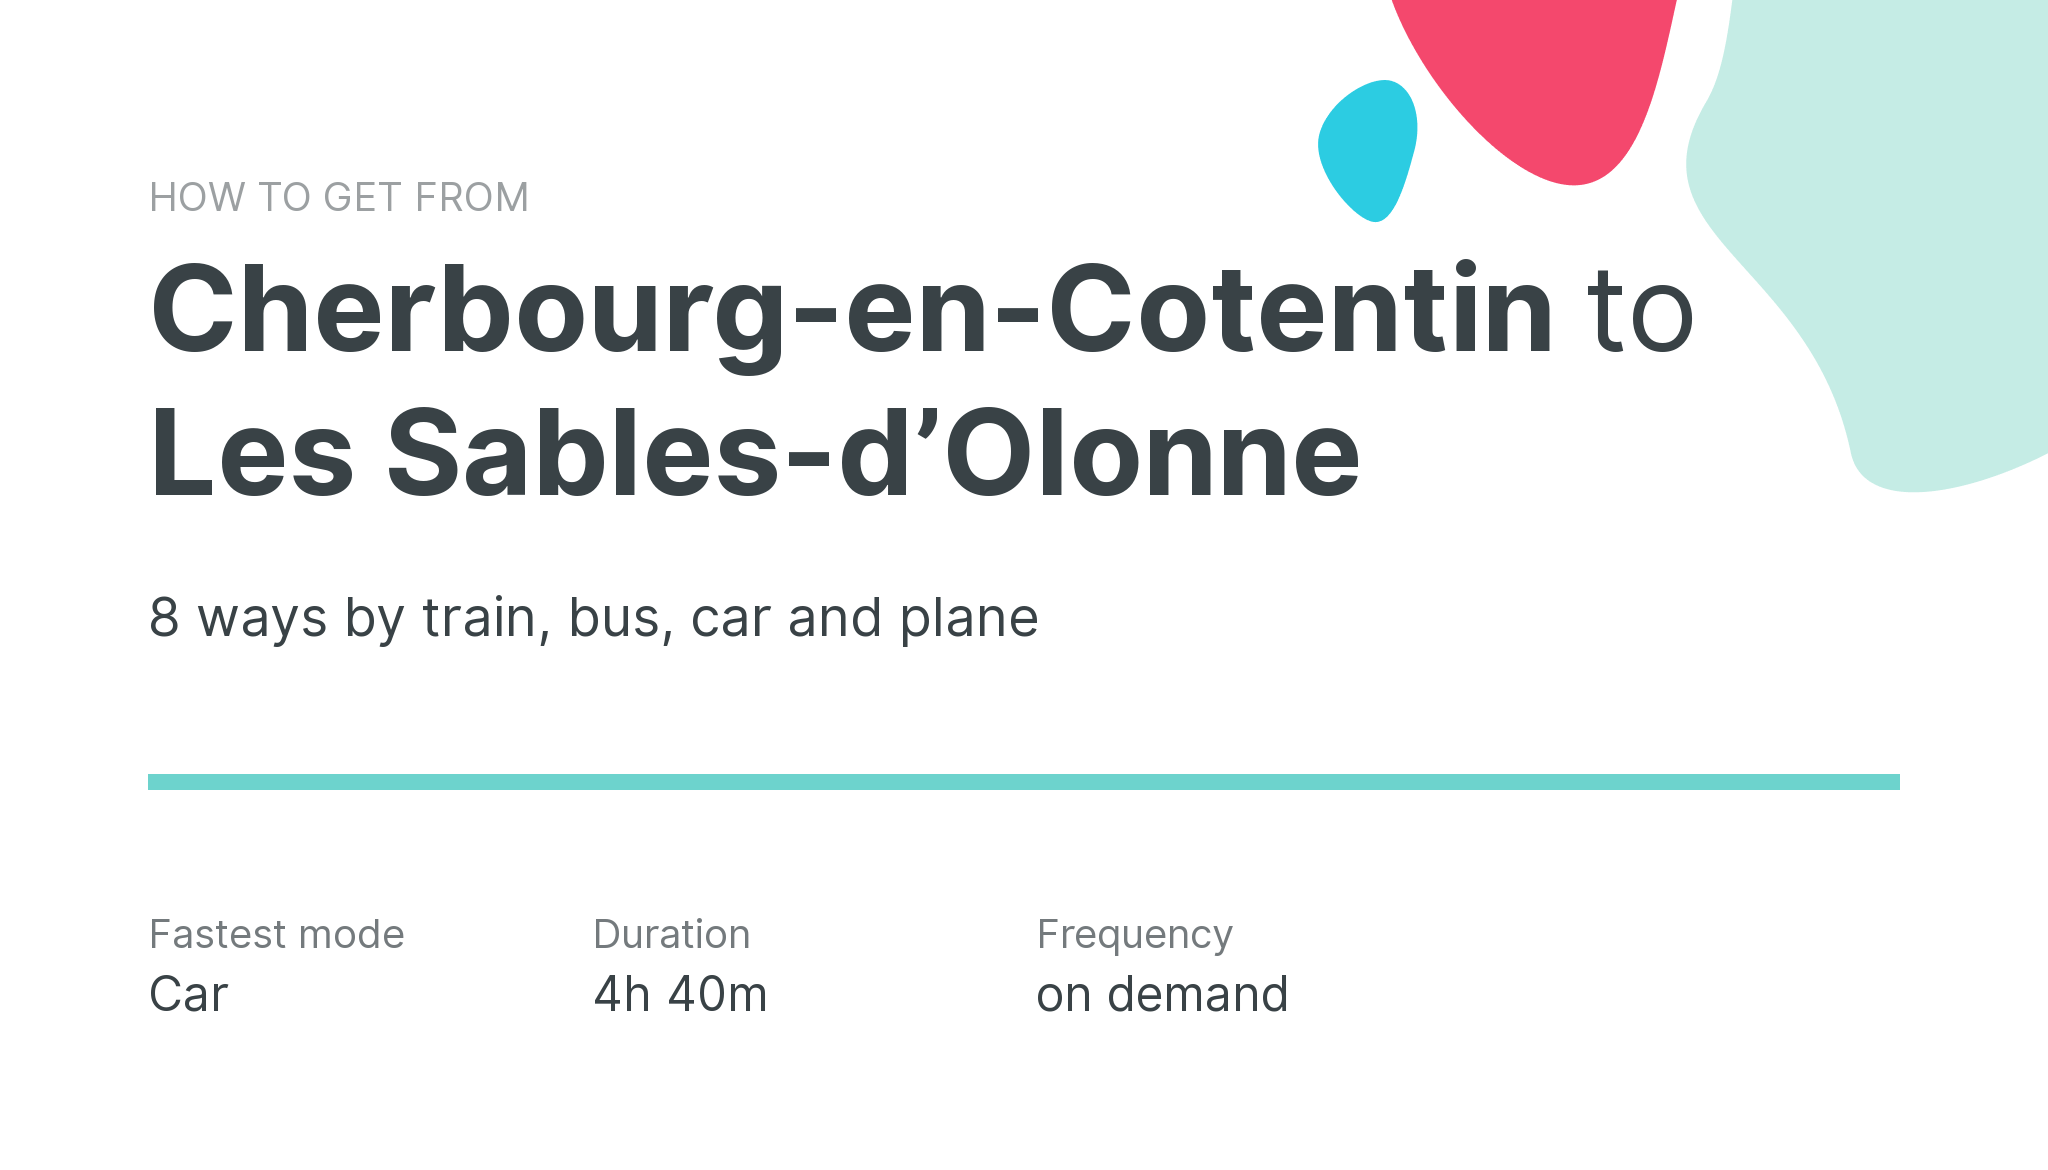 How do I get from Cherbourg-en-Cotentin to Les Sables-dʼOlonne